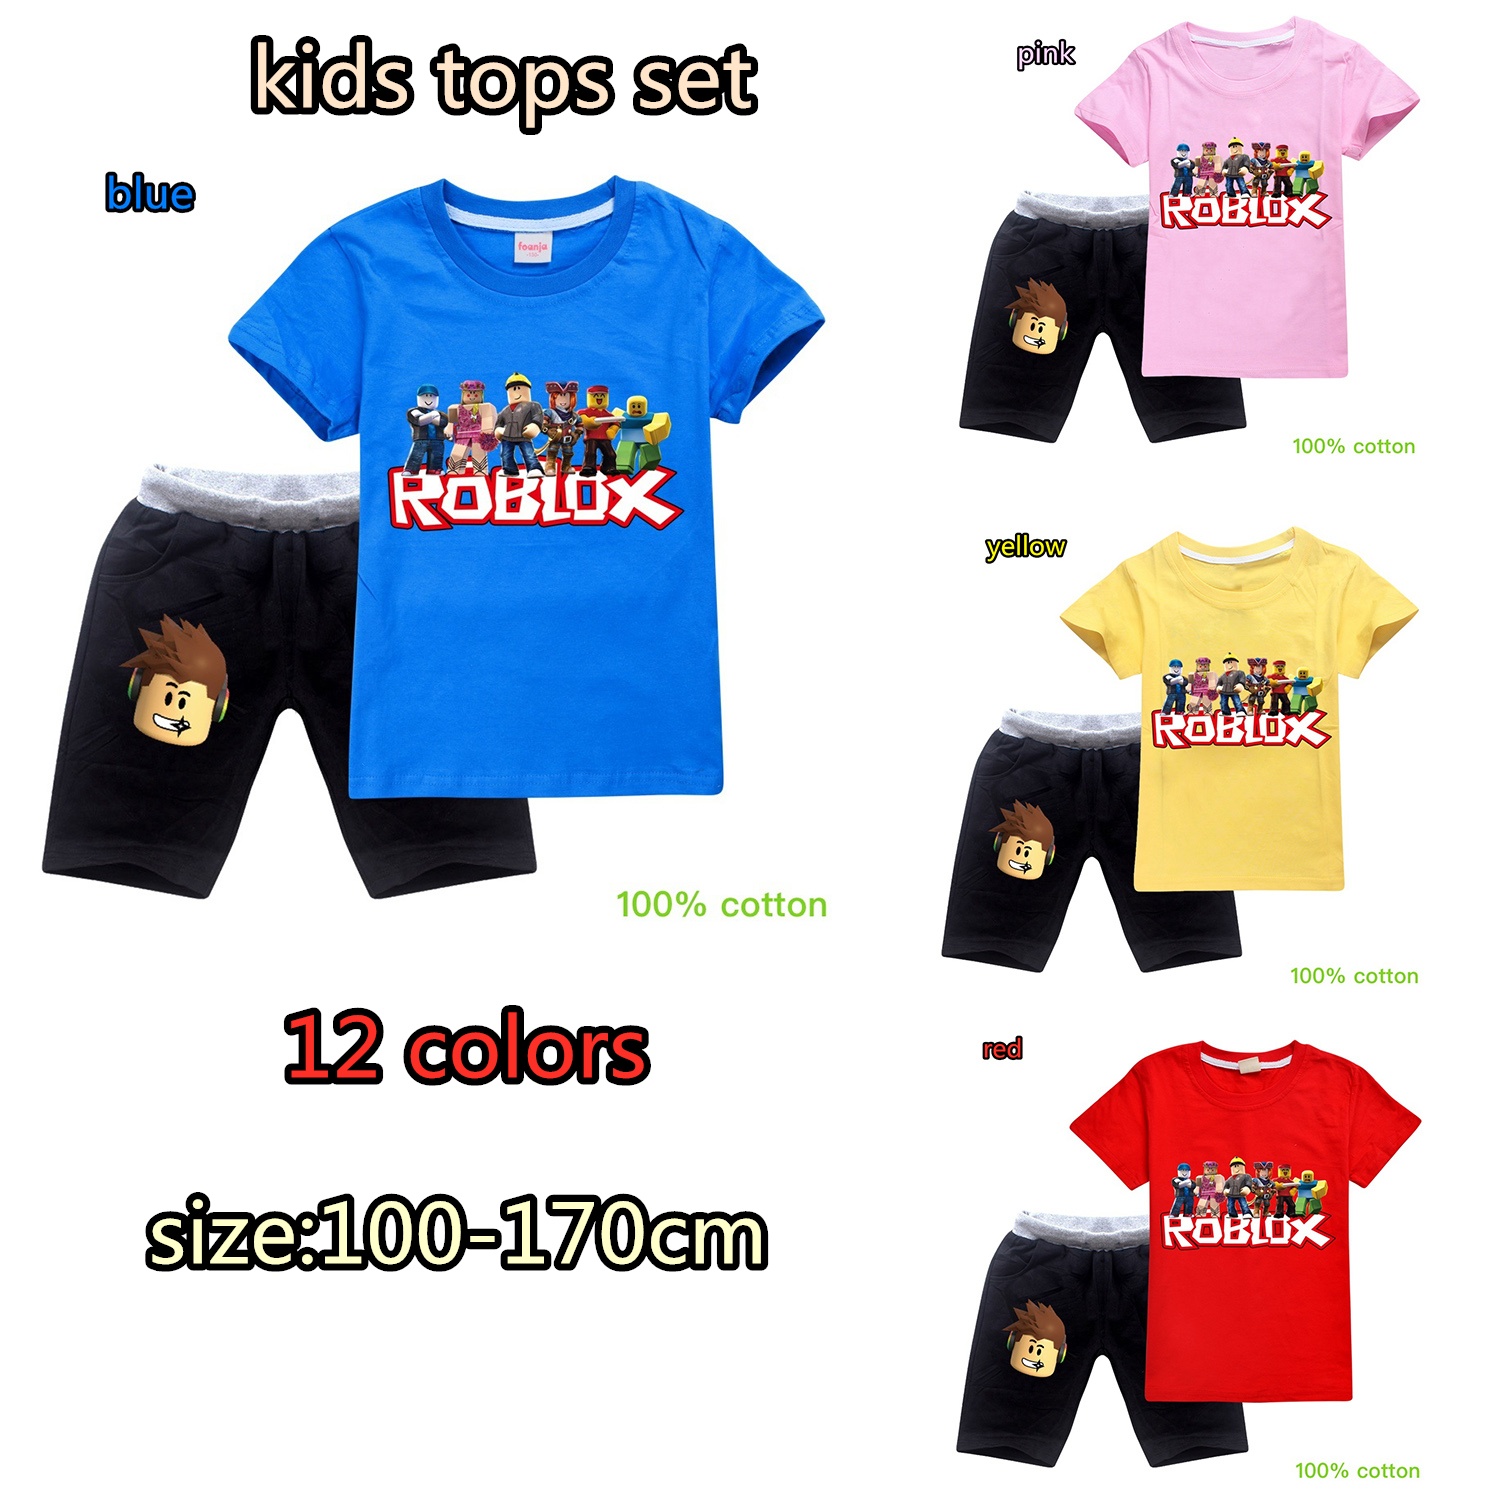 Boy And Girls Summer High Quality Casual Kids T Shirt And Shorts Pure Cotton Cartoon Roblox Tee Tops Shorts Sweatpants Outfit Set Wish - choses top fashion roblox shirts charact girls039 t shirt